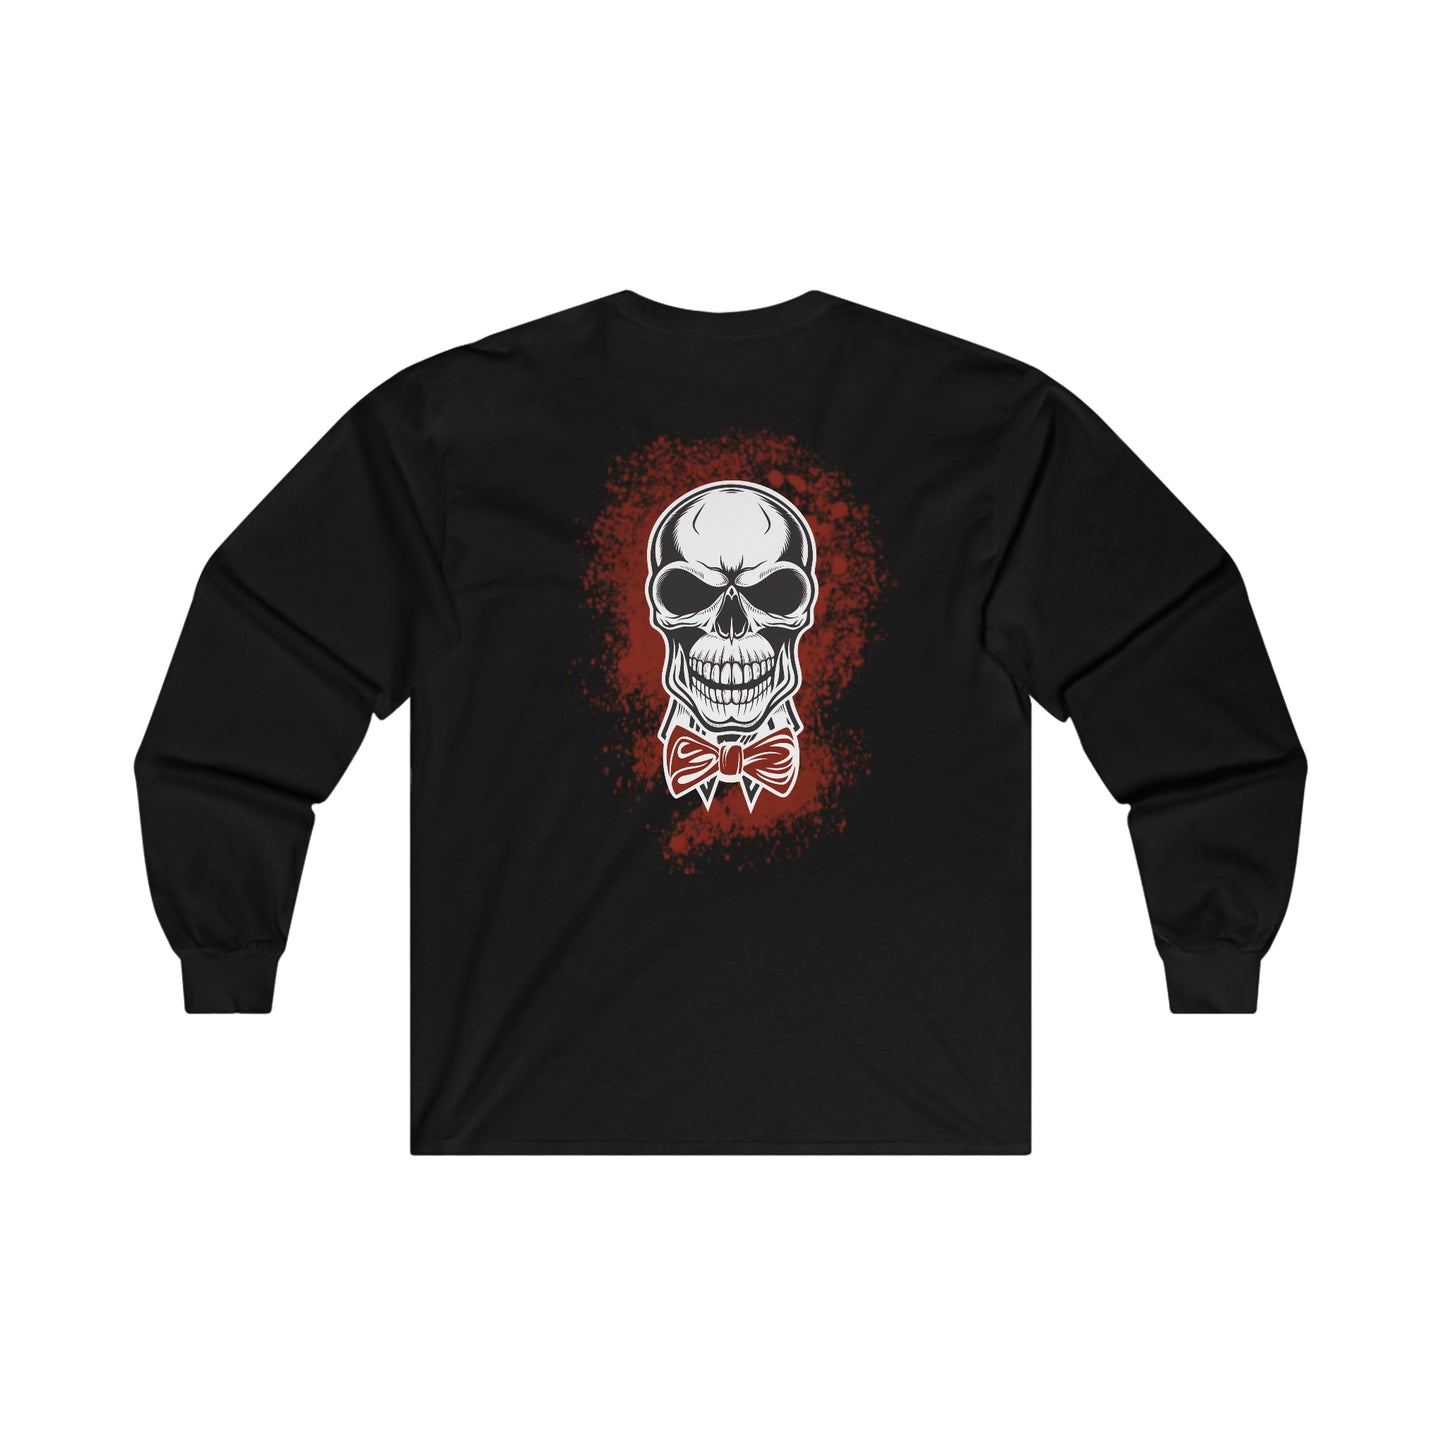 Skull and Bow Tie - Ultra Cotton Long Sleeve Tee